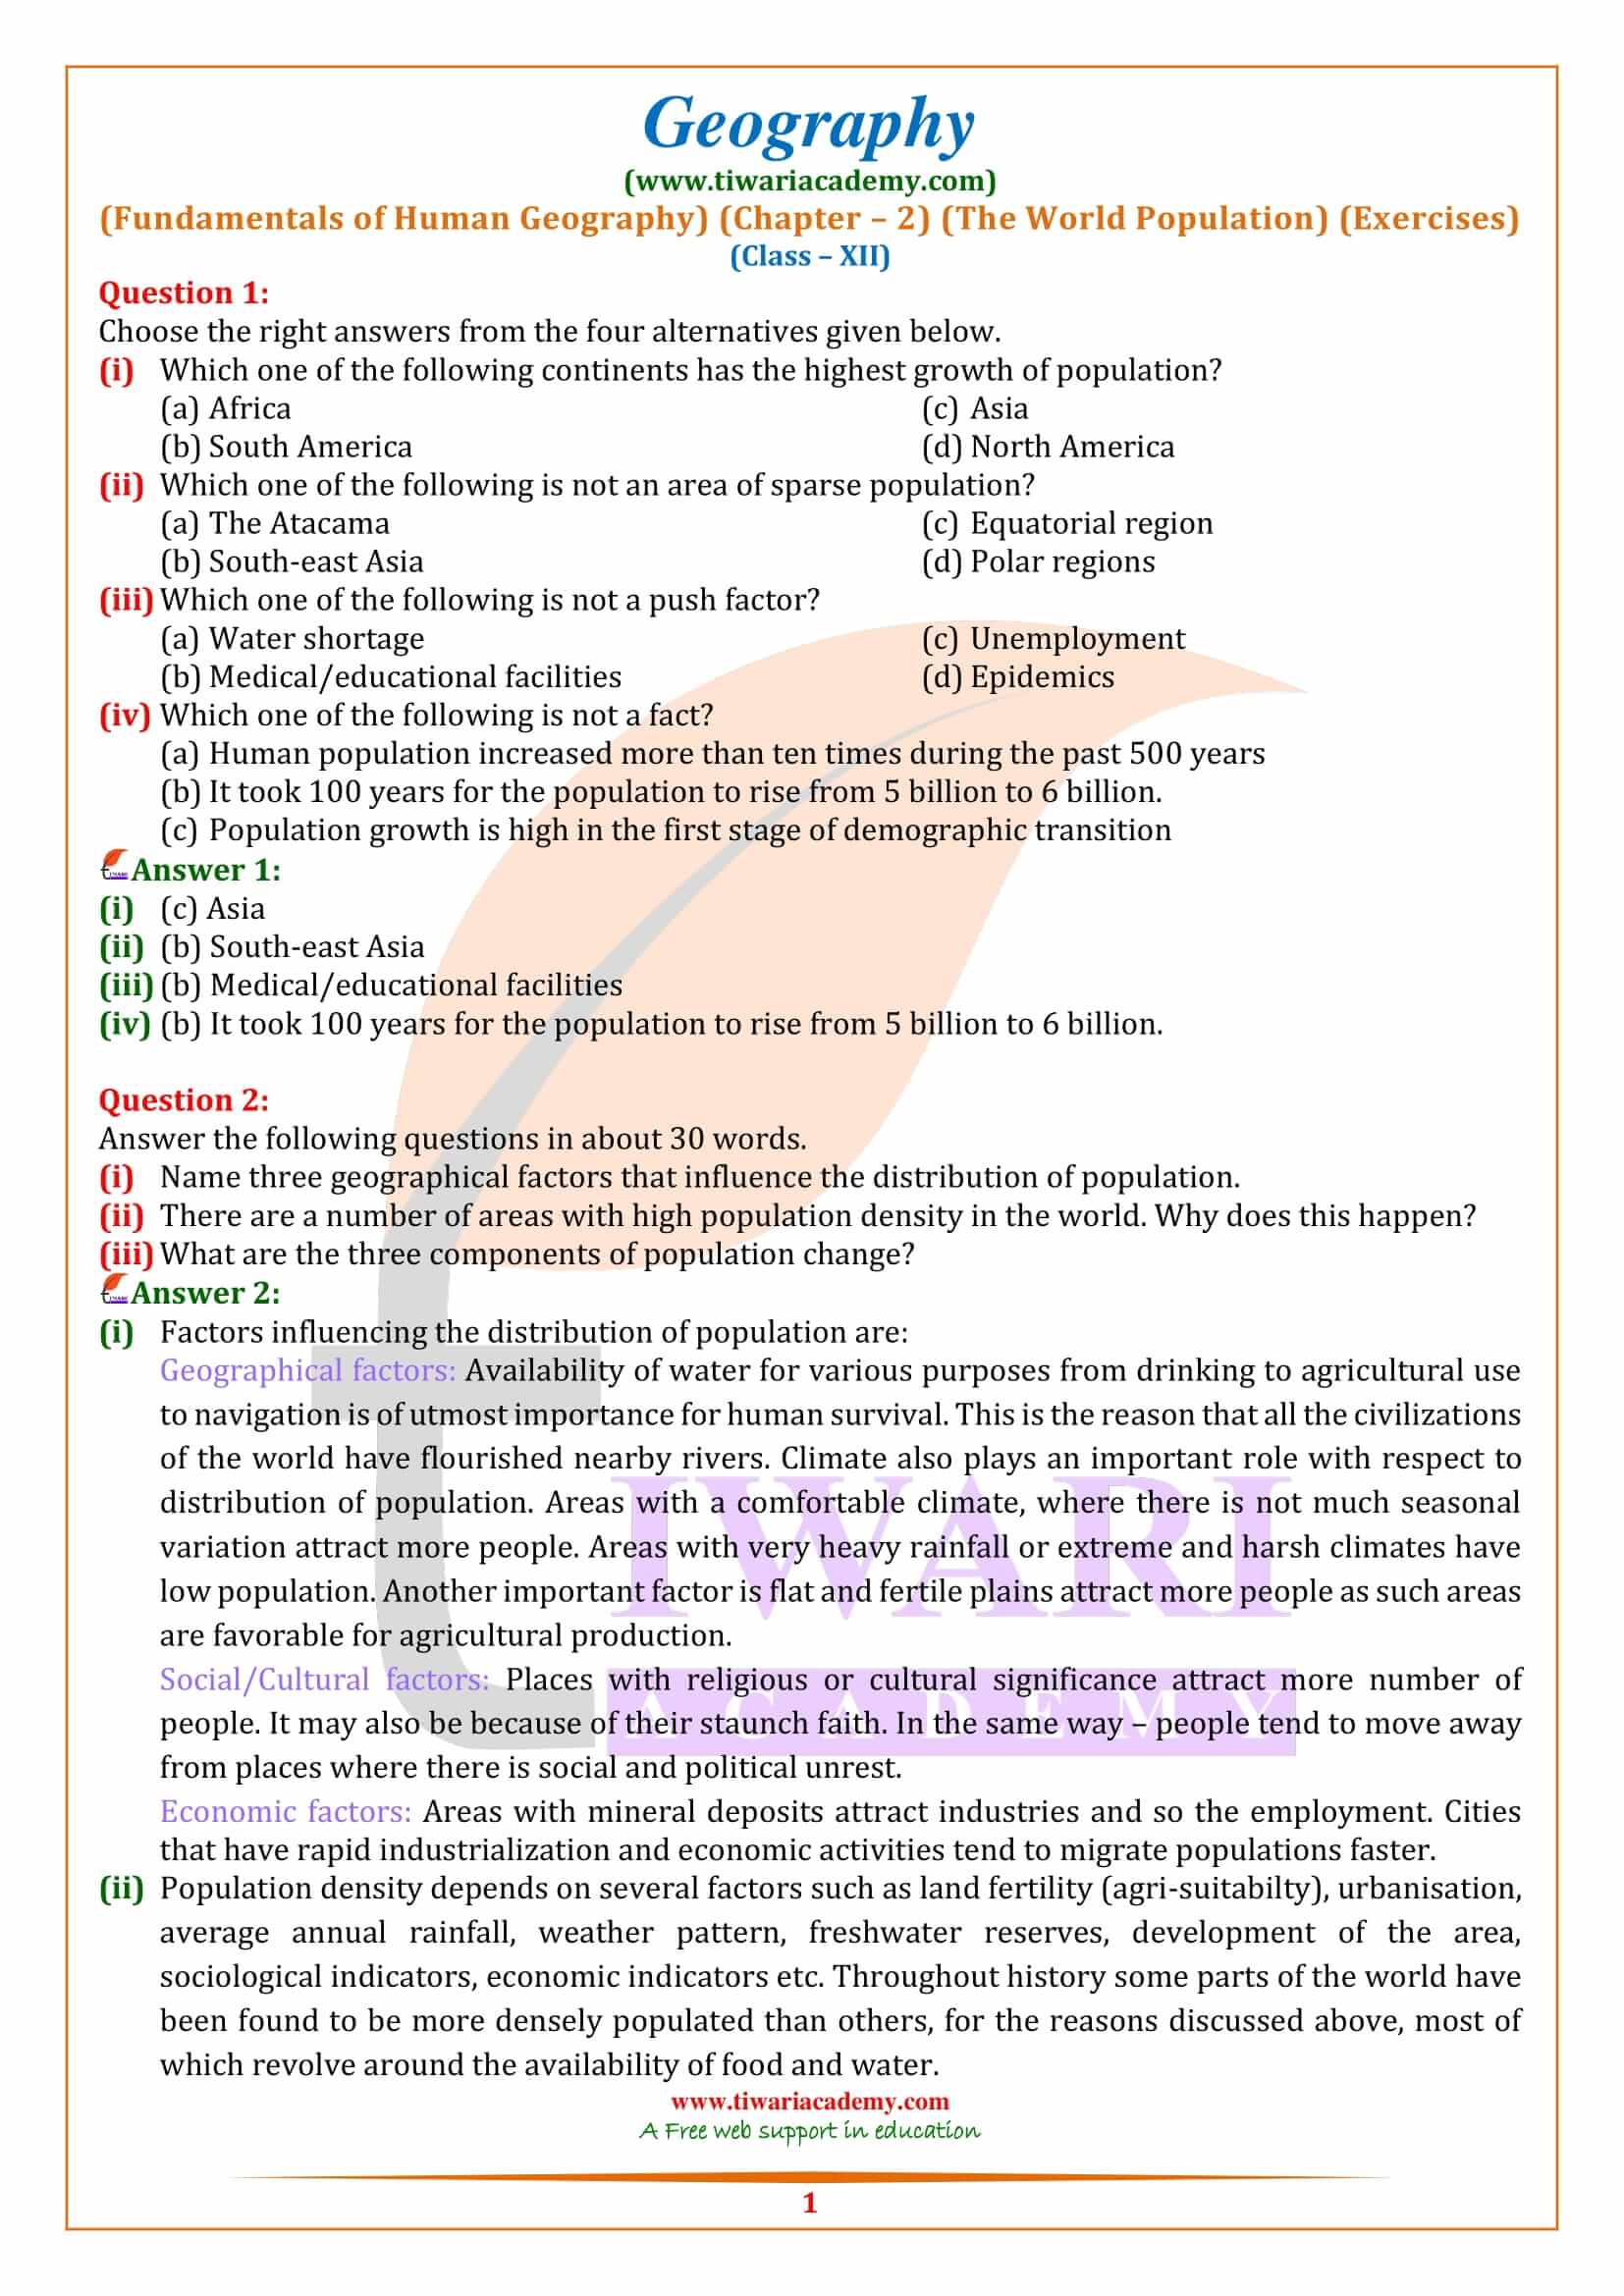 NCERT Solutions for Class 12 Geography Chapter 2